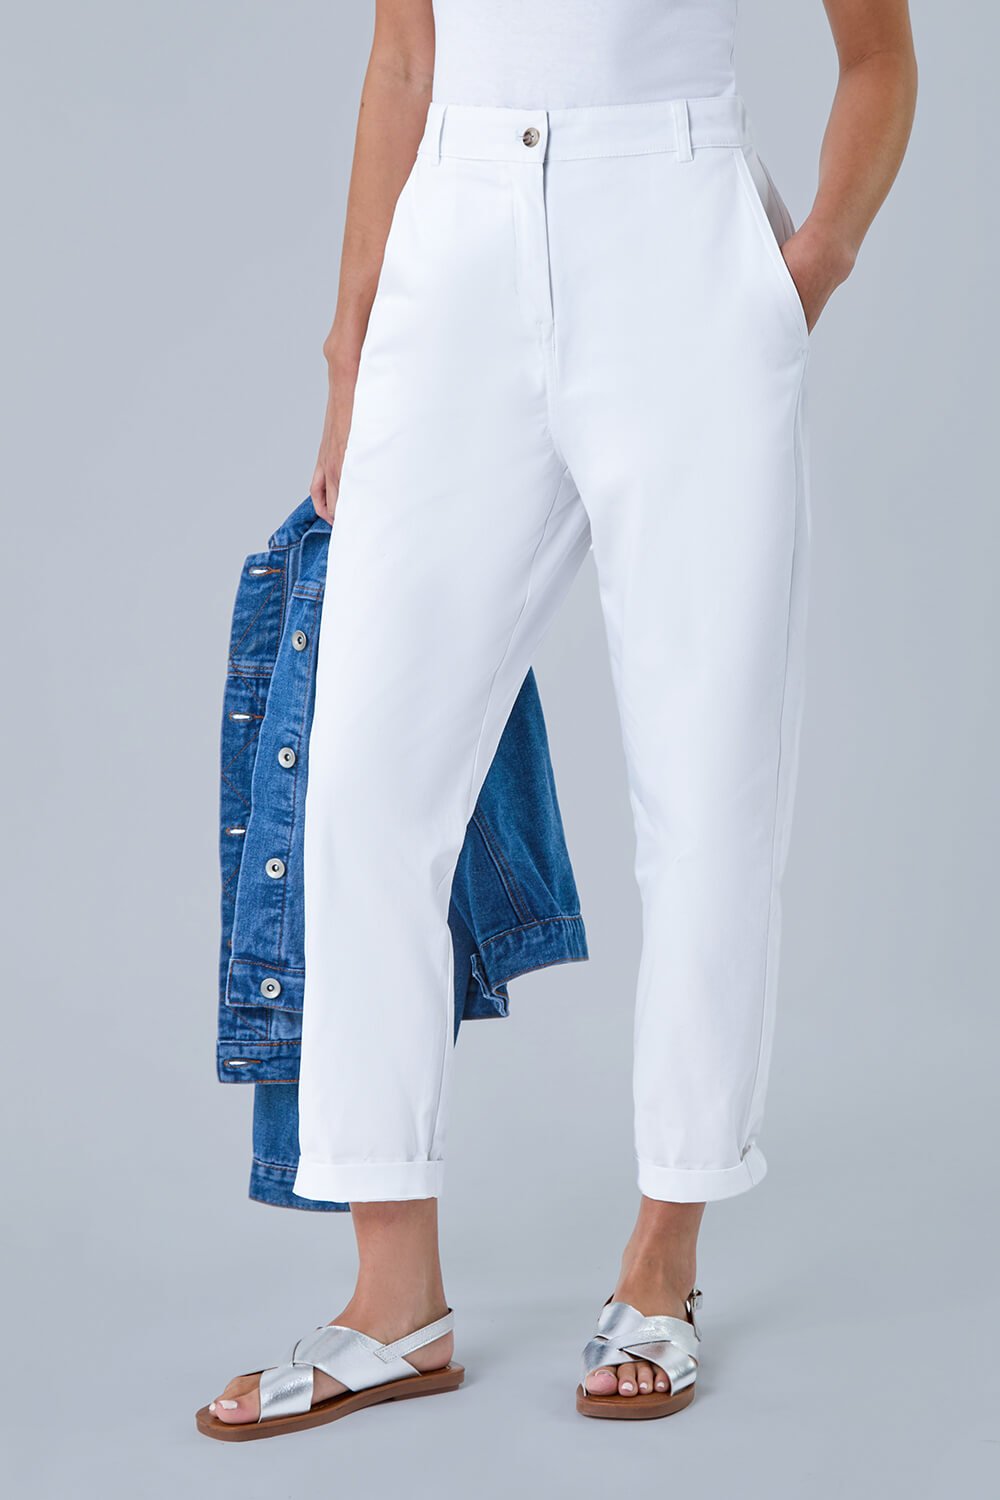 White Petite Cotton Blend Stretch Chino Trousers, Image 4 of 5